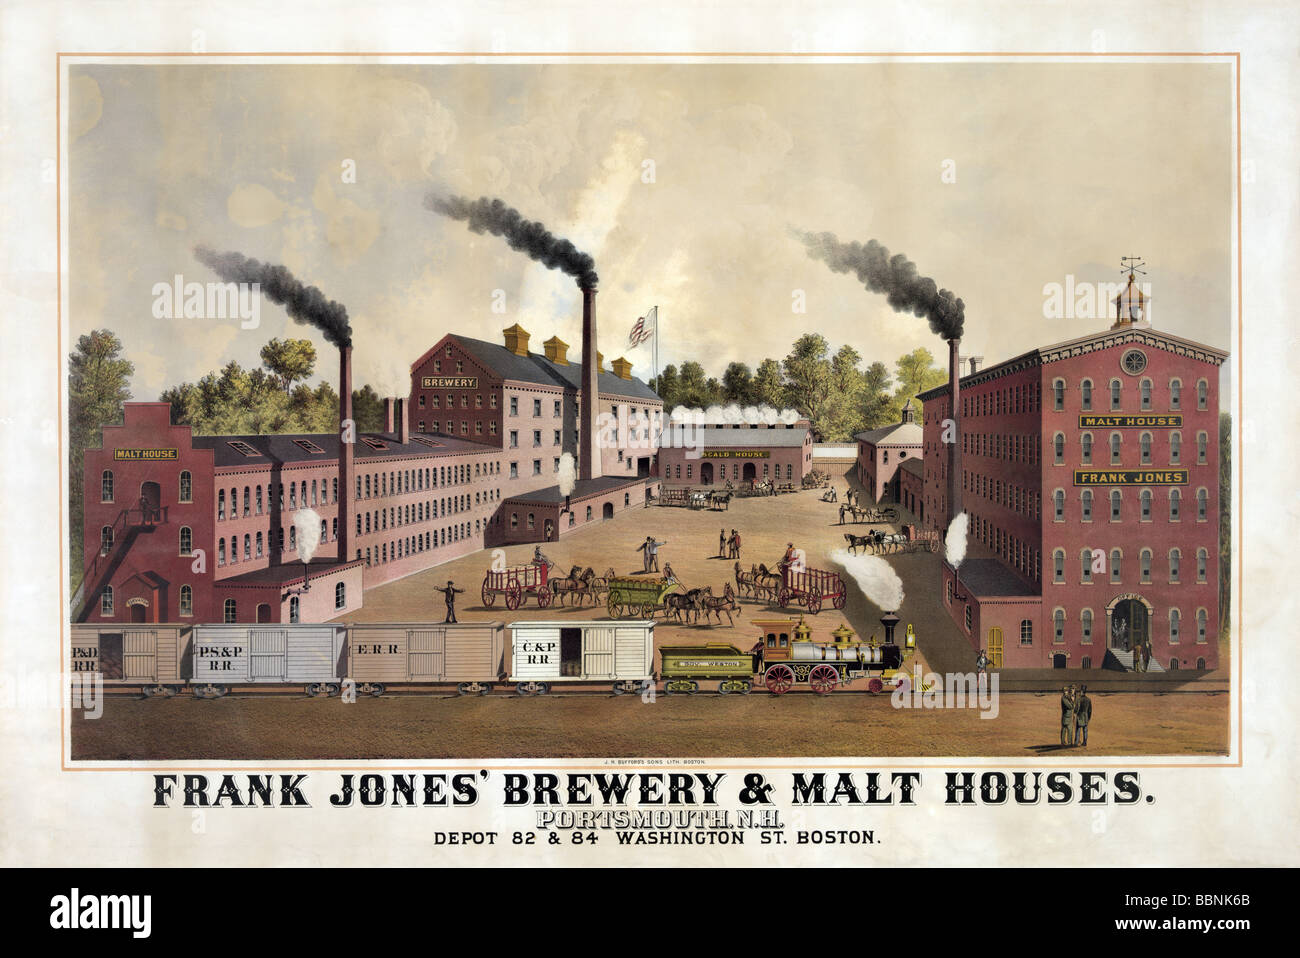 Lithograph print circa 1890s advertising Frank Jones’ Brewery and Malt Houses, of Portsmouth, New Hampshire, USA. Stock Photo